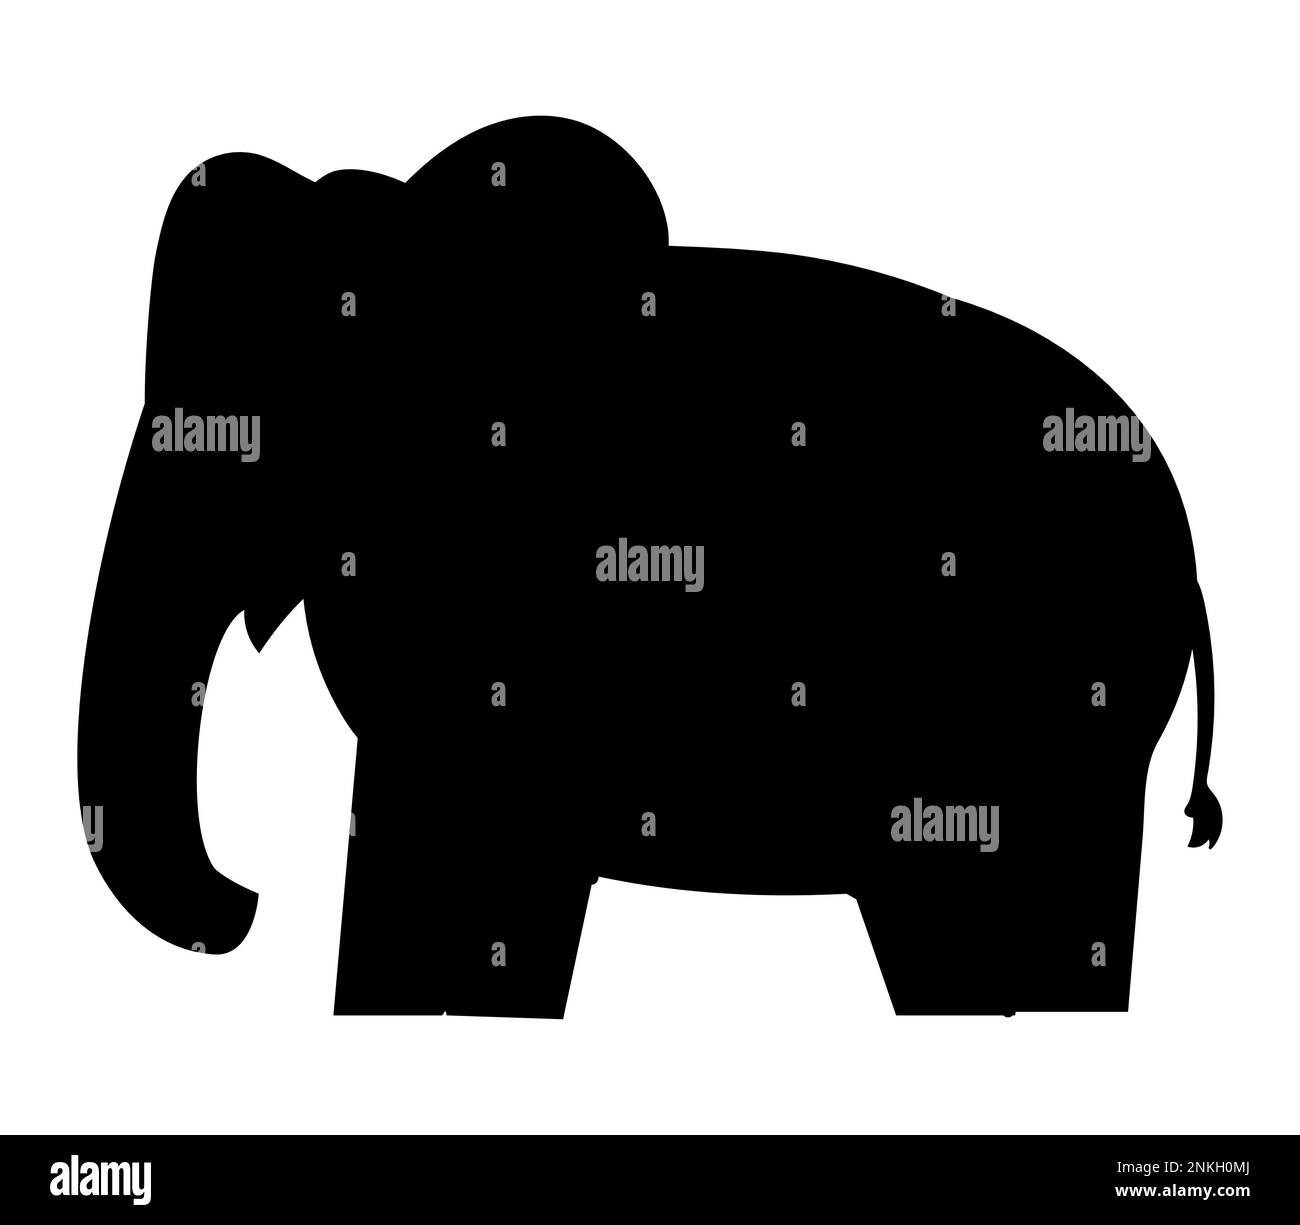 Silhouette of a baby Elephant for logo or icon Stock Vector